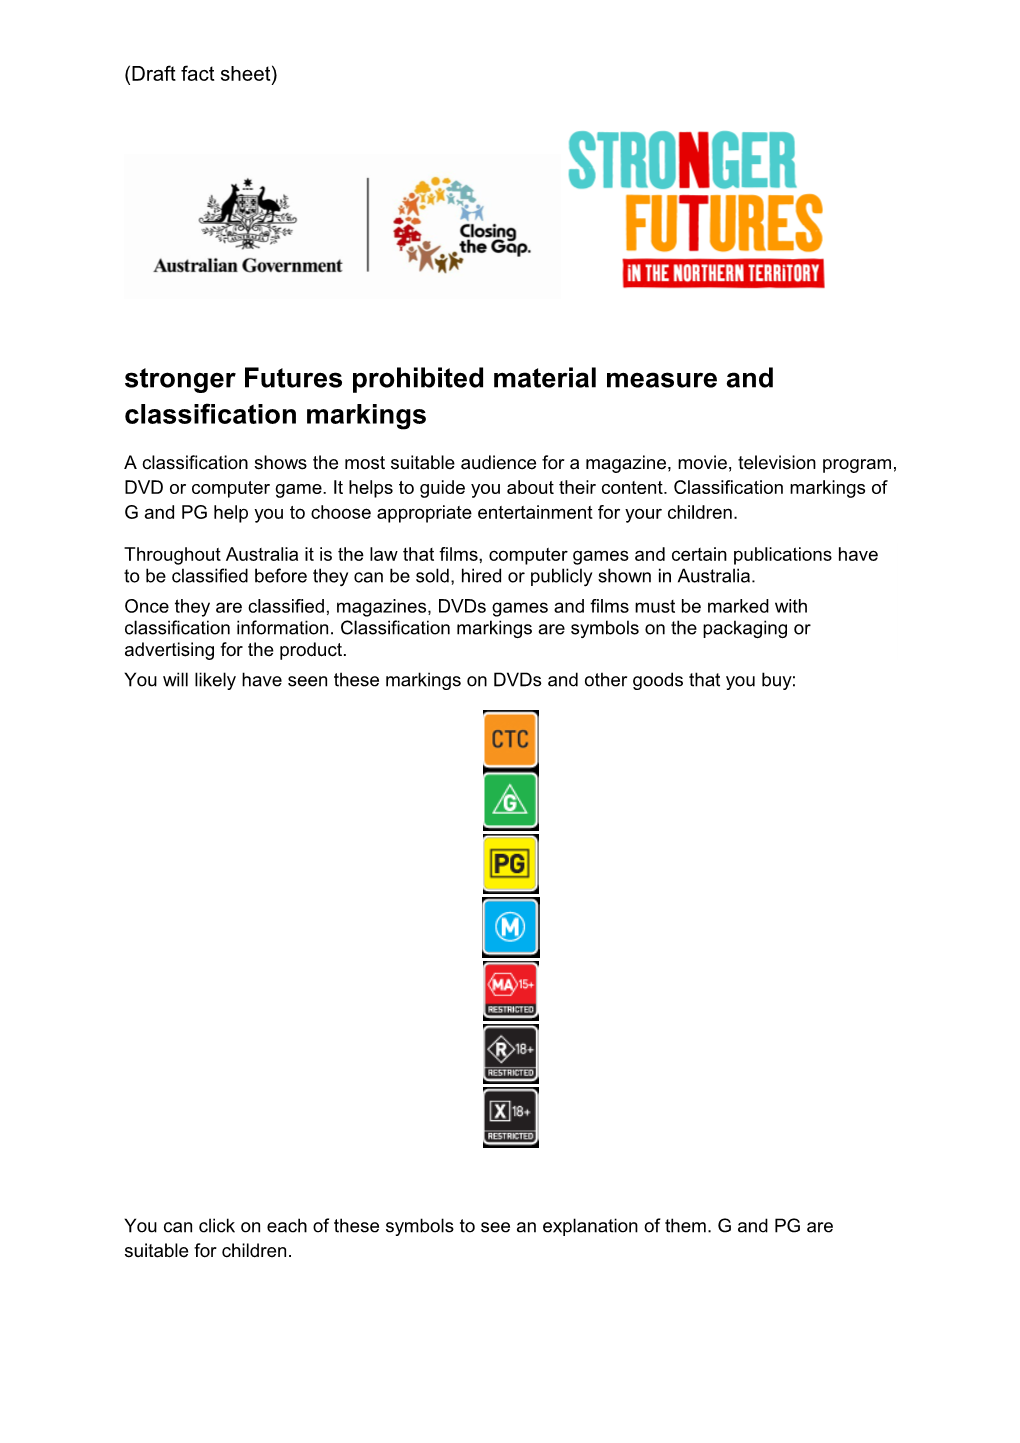 Stronger Futures Prohibited Material Measure and Classification Markings